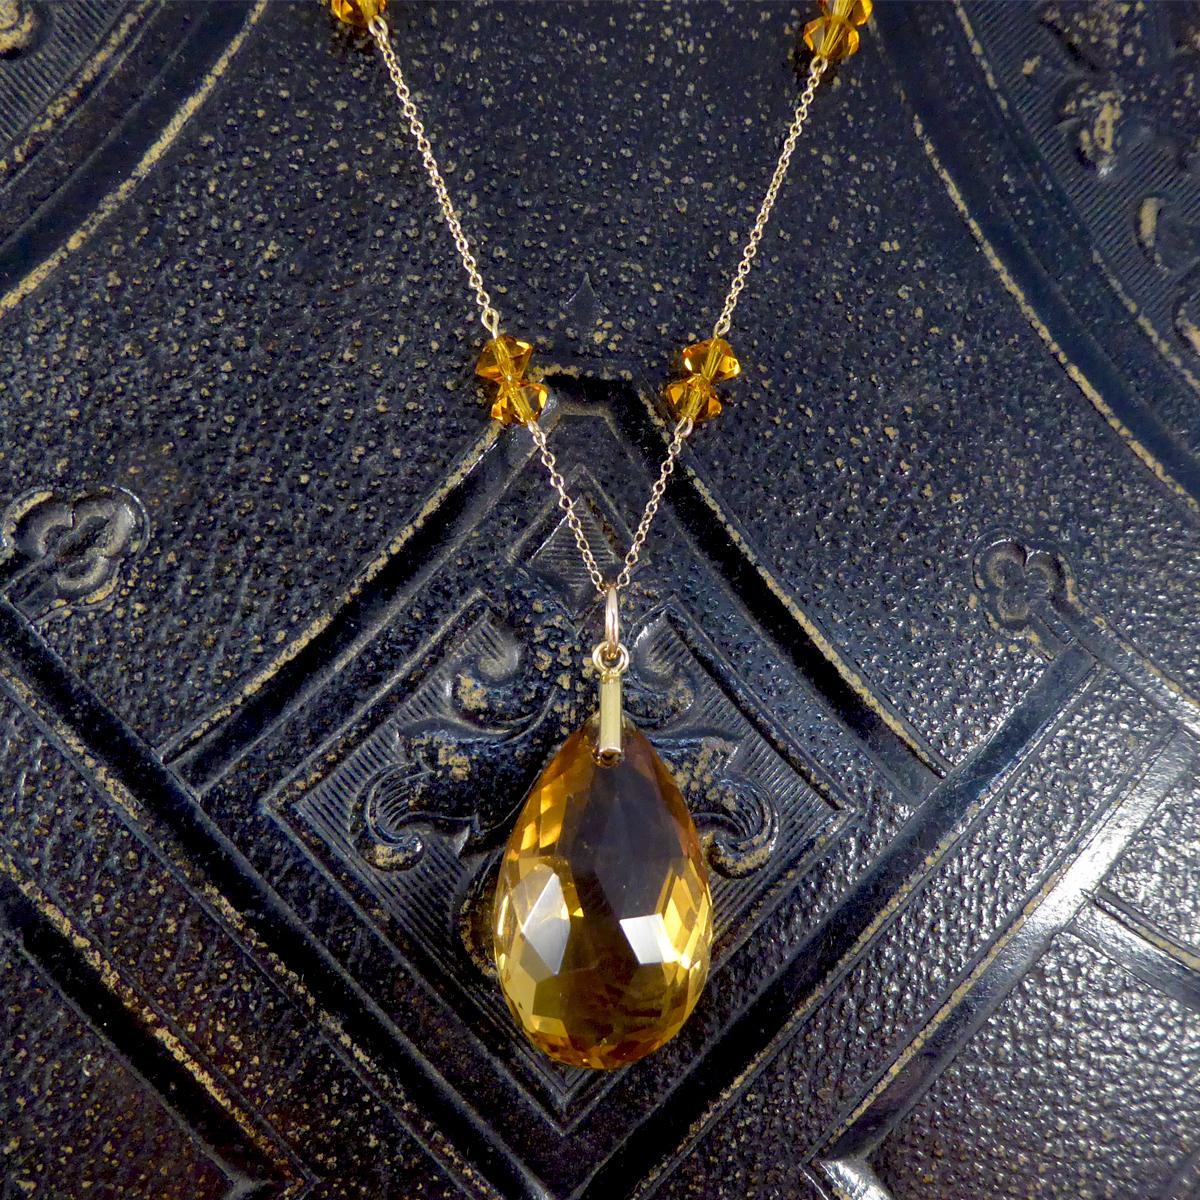 Such a gorgeous and graceful antique necklace. It has been hand crafted in the Edwardian era, featuring a Critrene drop pendant with Citrene spacers throughout the 9ct Yellow Gold Chain.

Condition: Very Good, slightest signs of wear due to age and